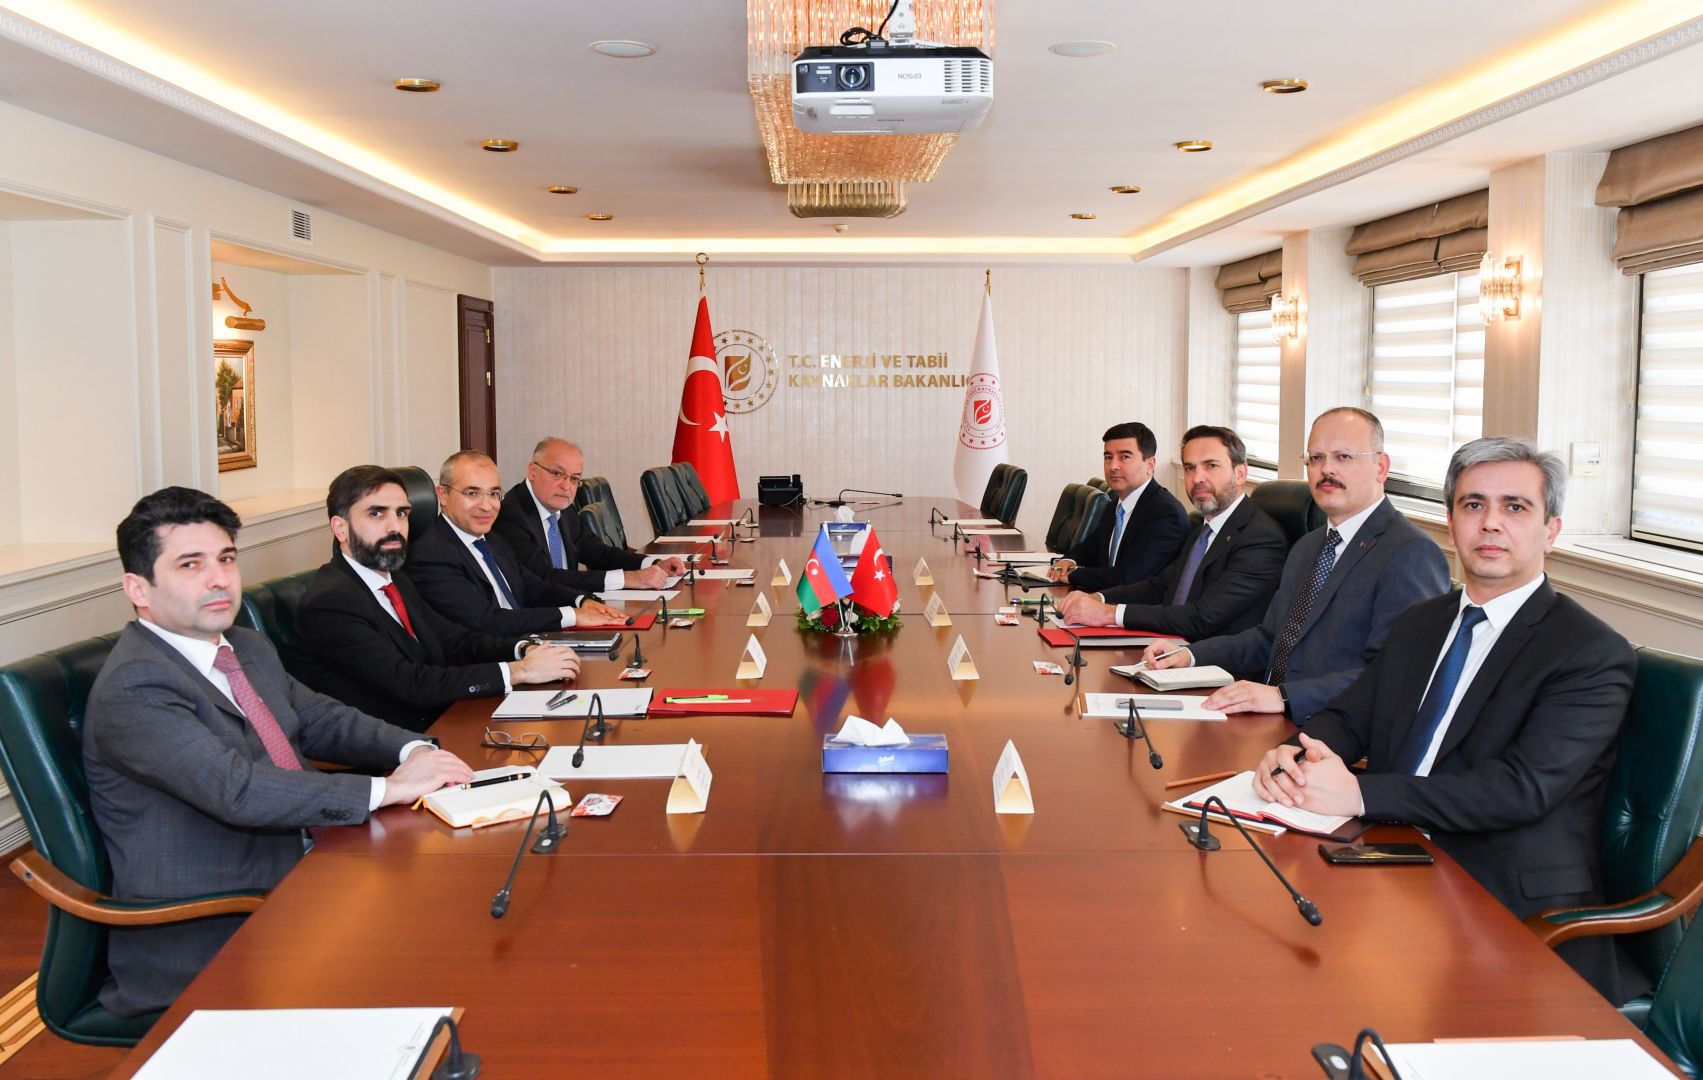 Azerbaijani Economy Minister holds meeting with various Turkish officials [PHOTOS]